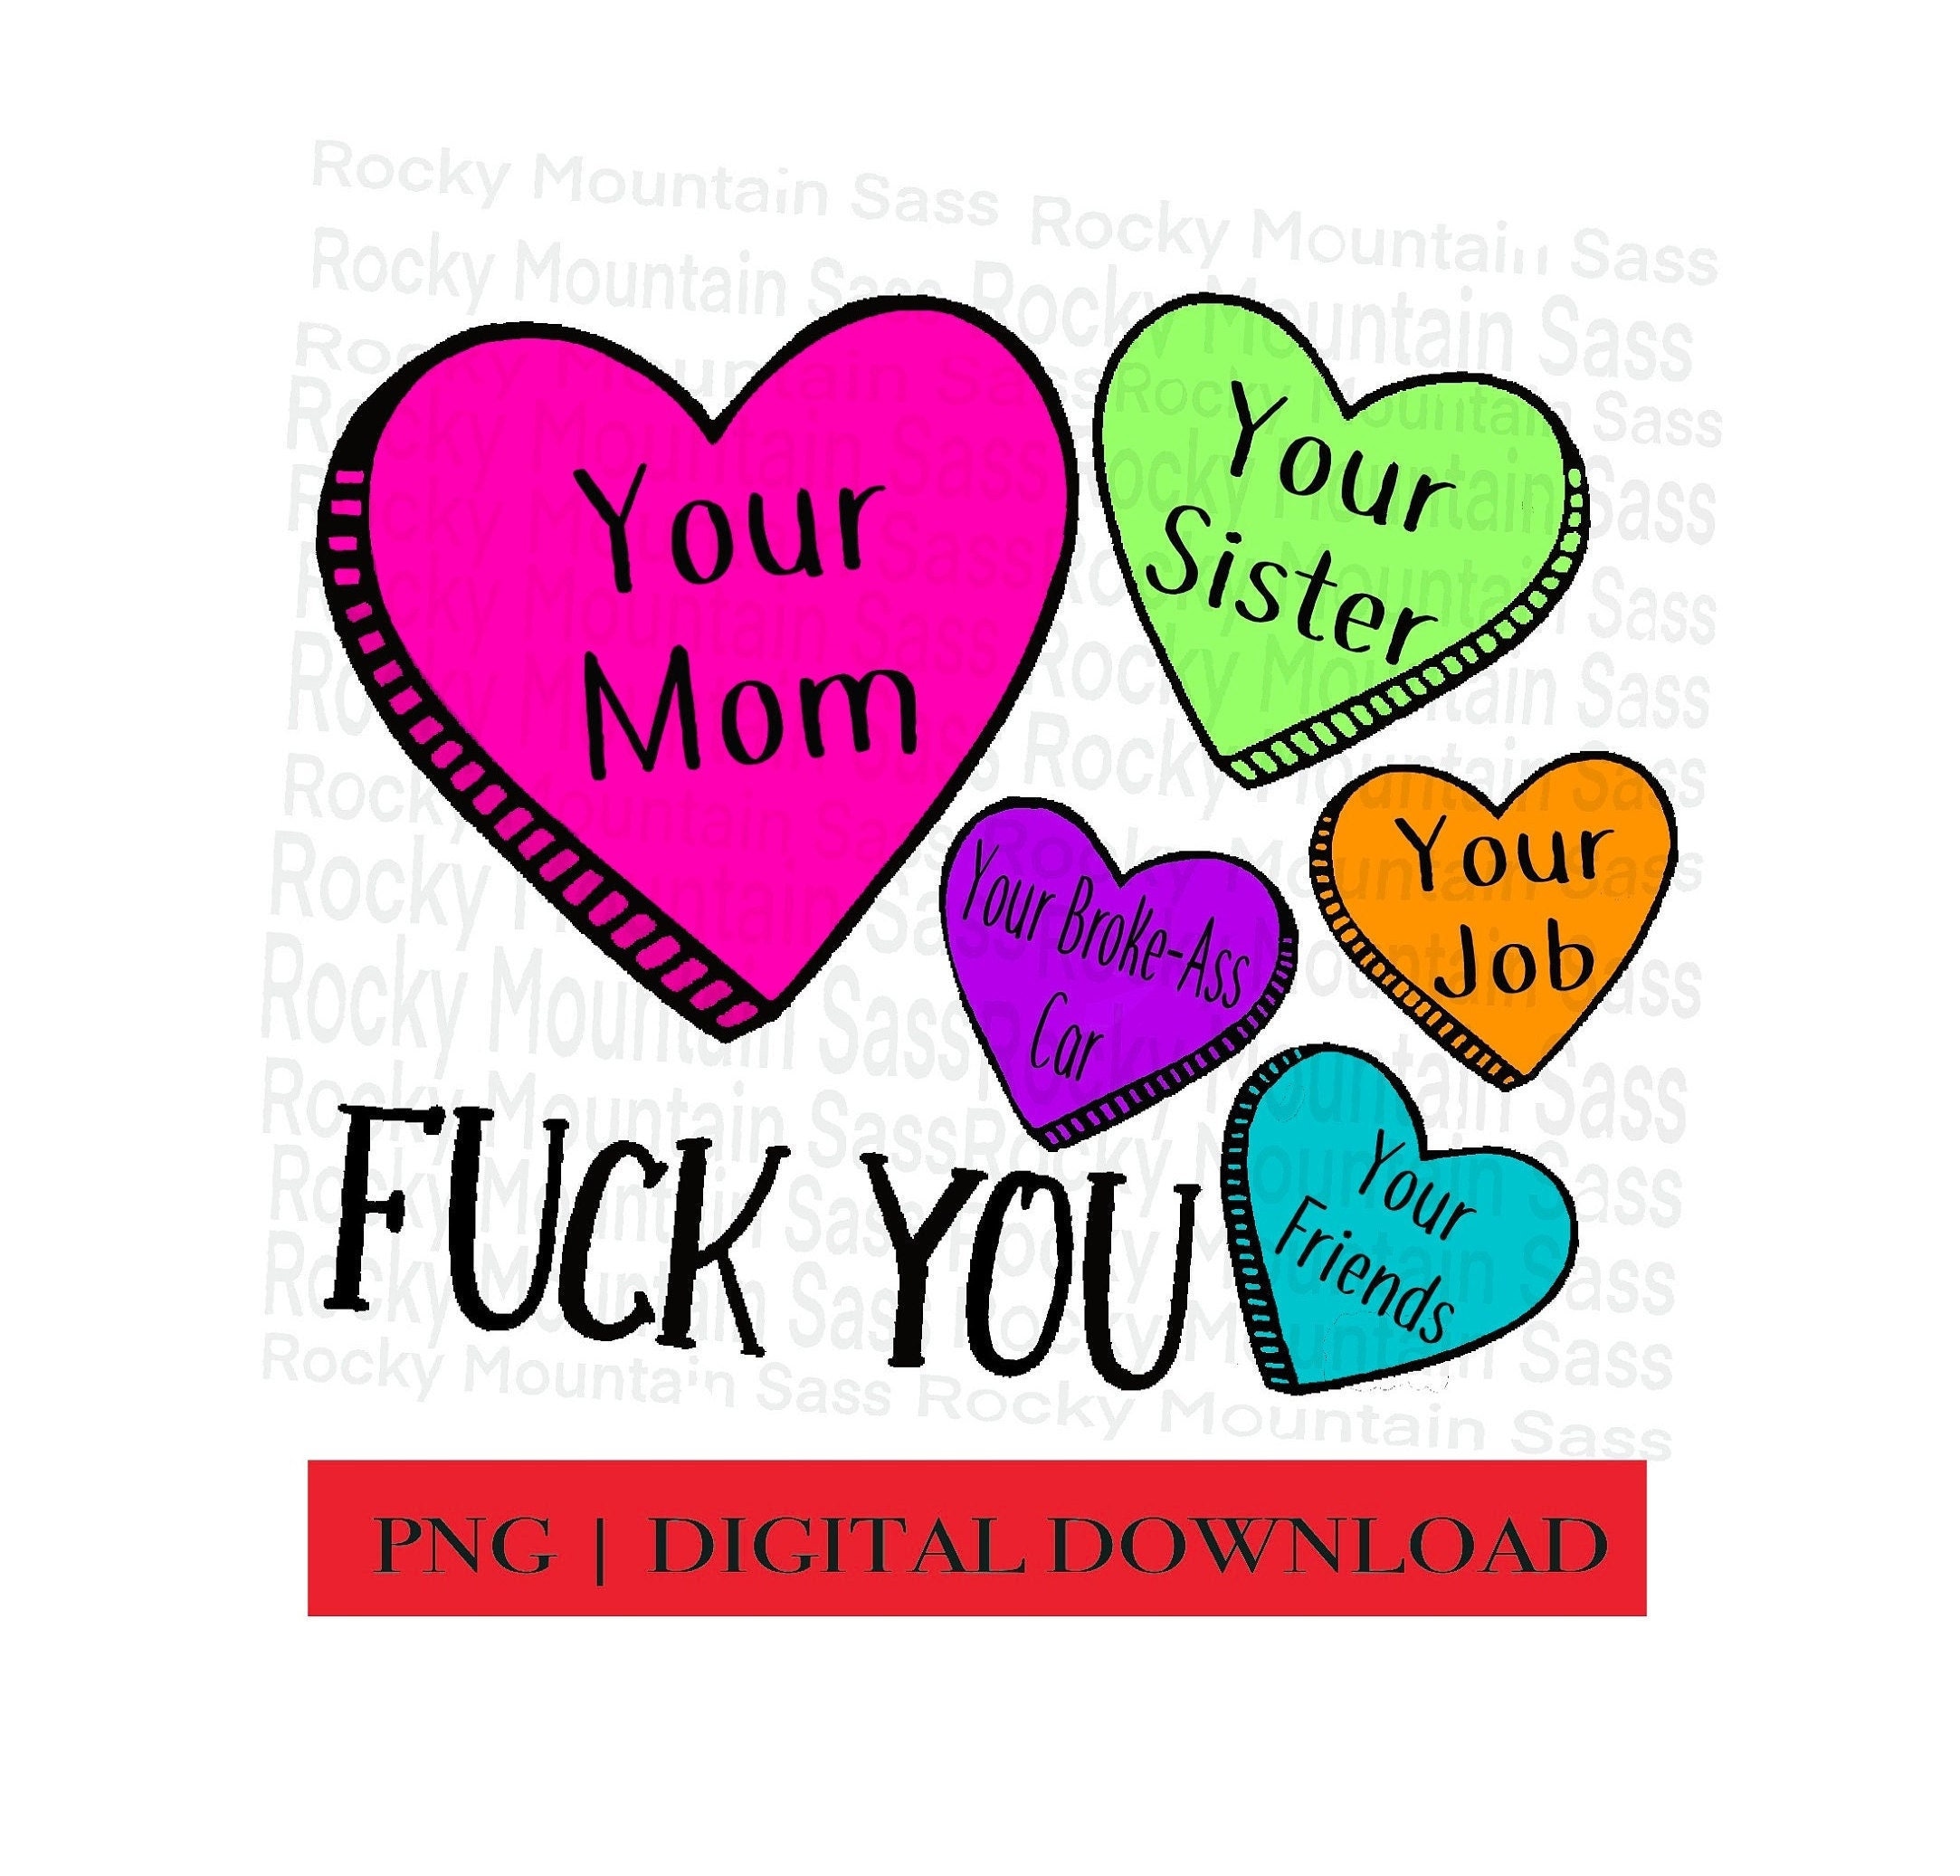 ahmed mohamed rady recommends Fuck You Mom